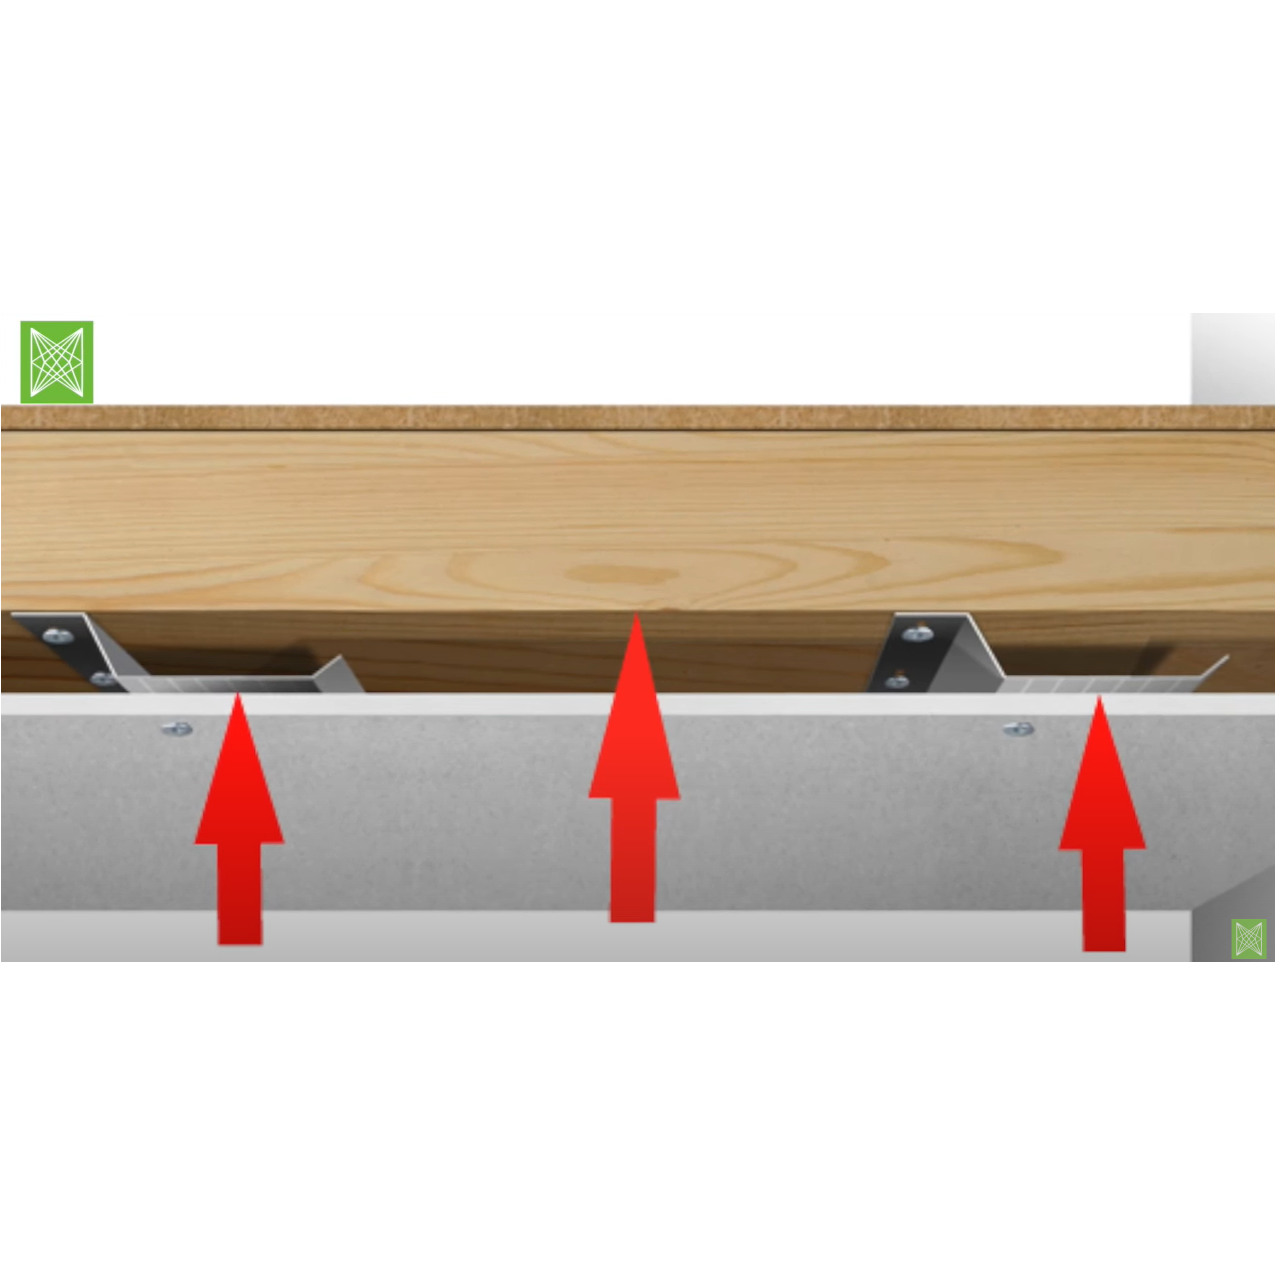 How to install Hush Bar resilient bar: the high quality acoustic bar from Hush Acoustics